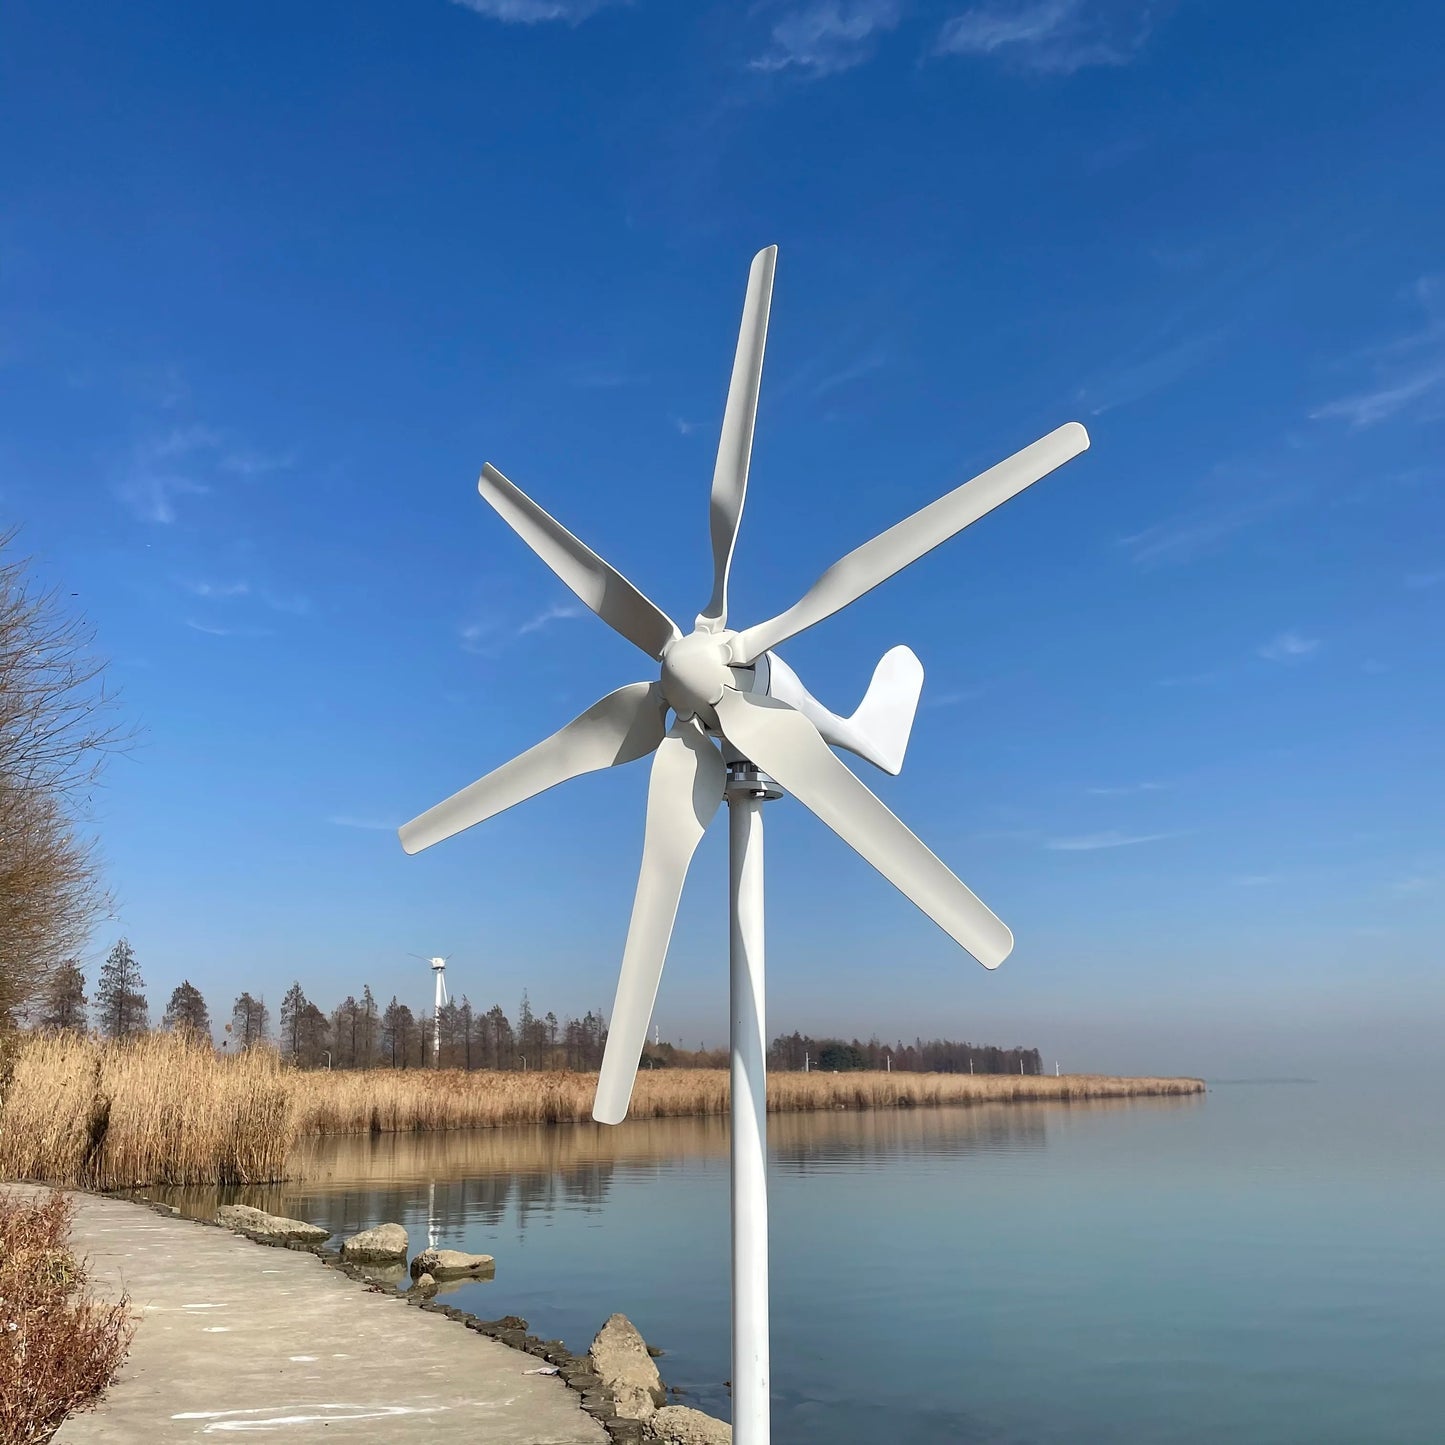 800W 48V Wind Turbine With 6 Blades And Free 48V MPPT Controller Small Wind Turbine For Home Use